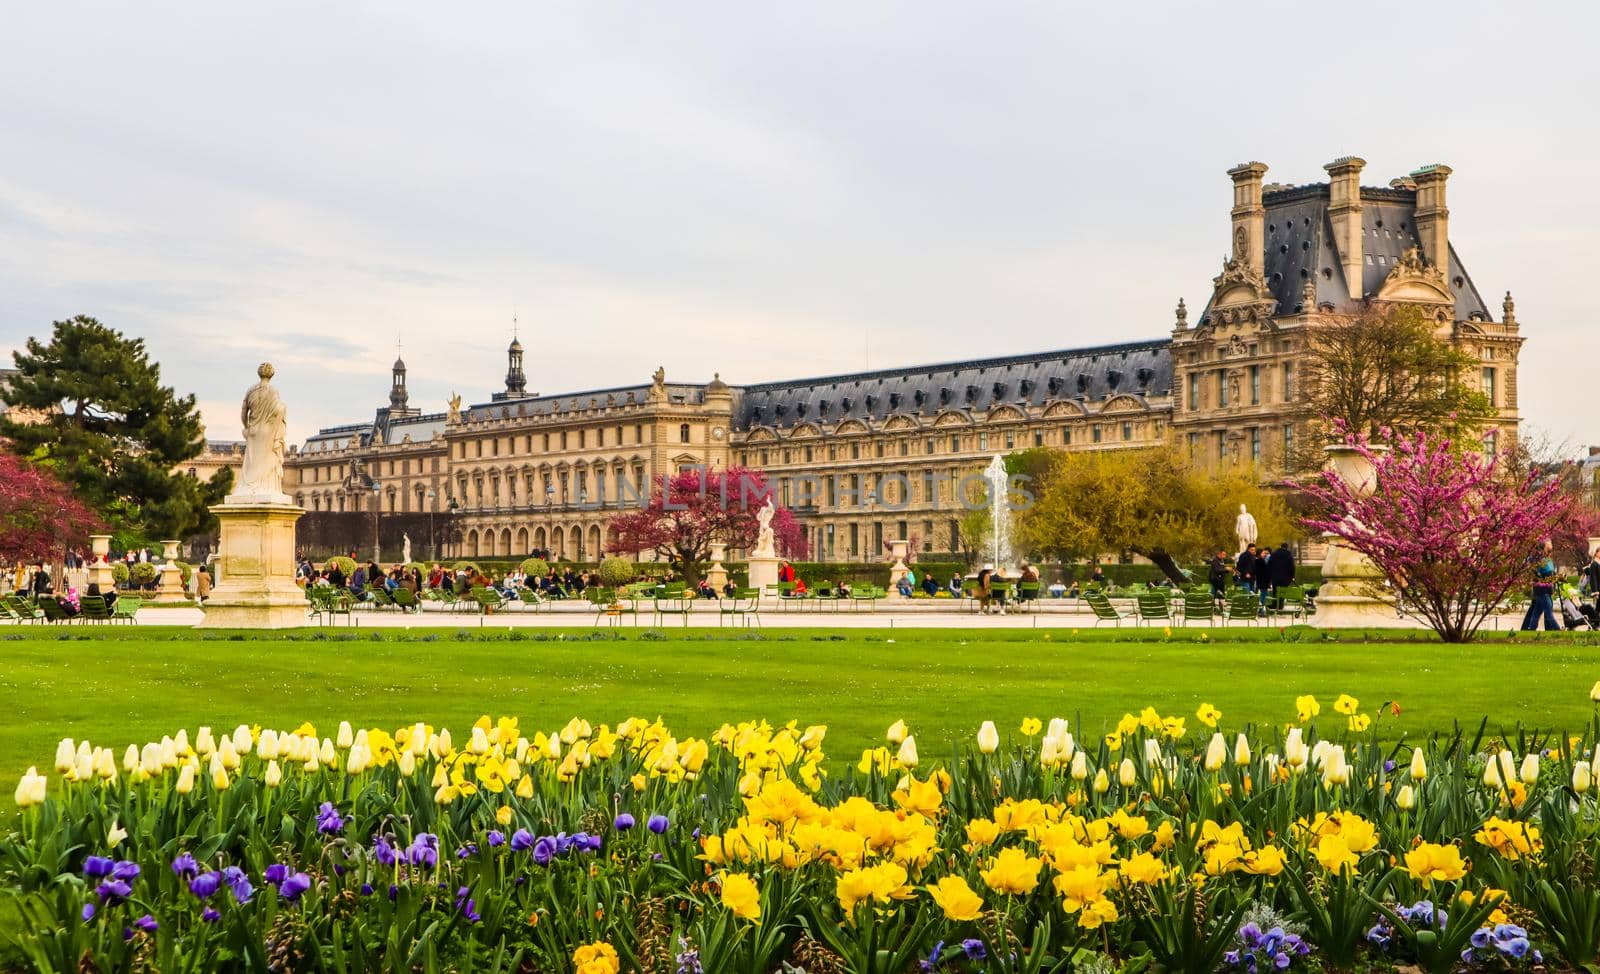 Marvelous spring Tuileries garden and view at the Louvre Palace in Paris France. April 2019